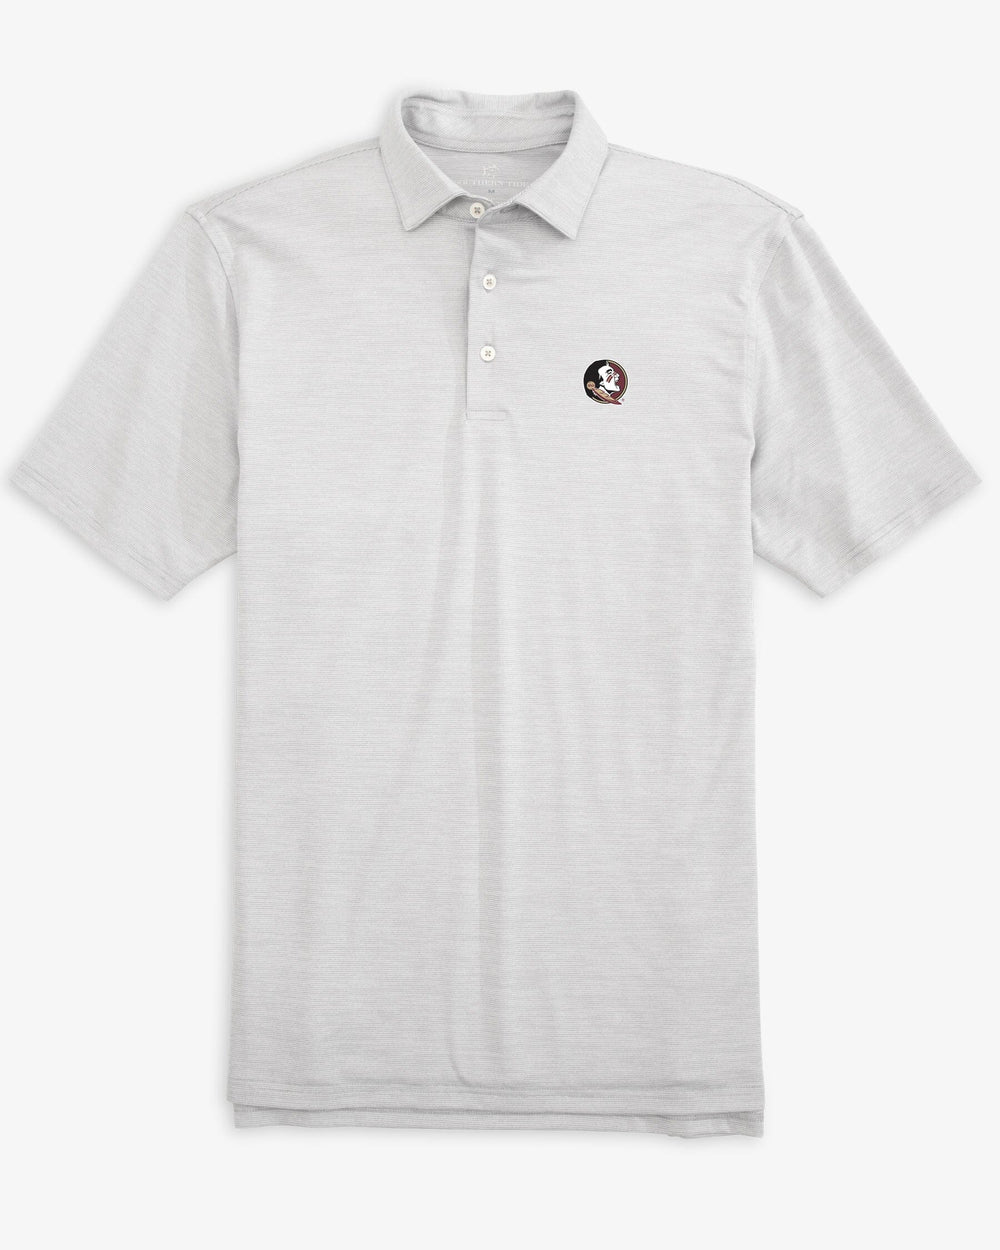 The front of the FSU Seminoles Driver Spacedye Polo Shirt by Southern Tide - Slate Grey